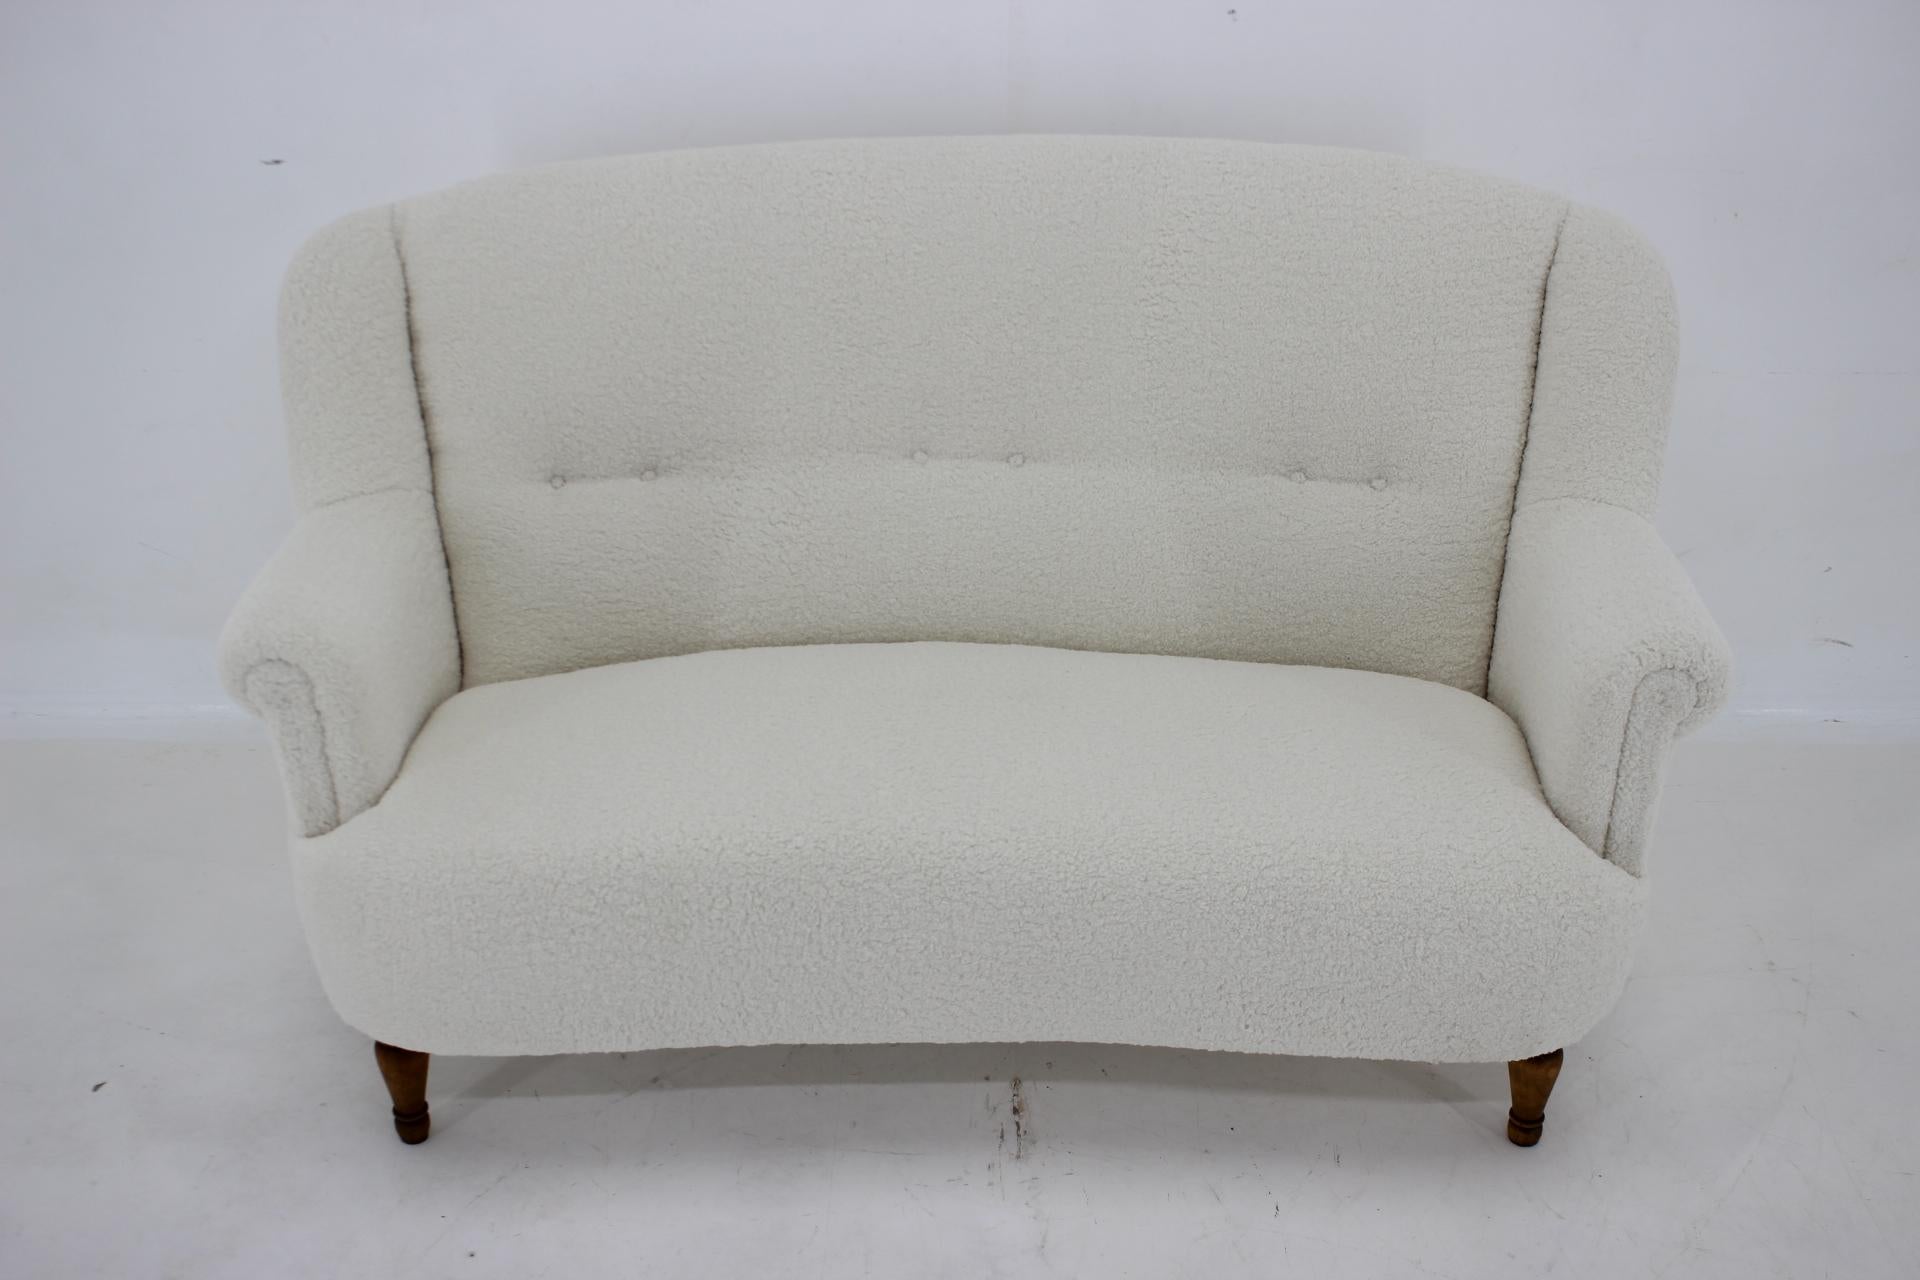 - newly upholstered 
- quality imitation of sheepskin fabric made of synthetic fiber
- wooden parts have been refurbished 
- heigh of seat 38 cm.